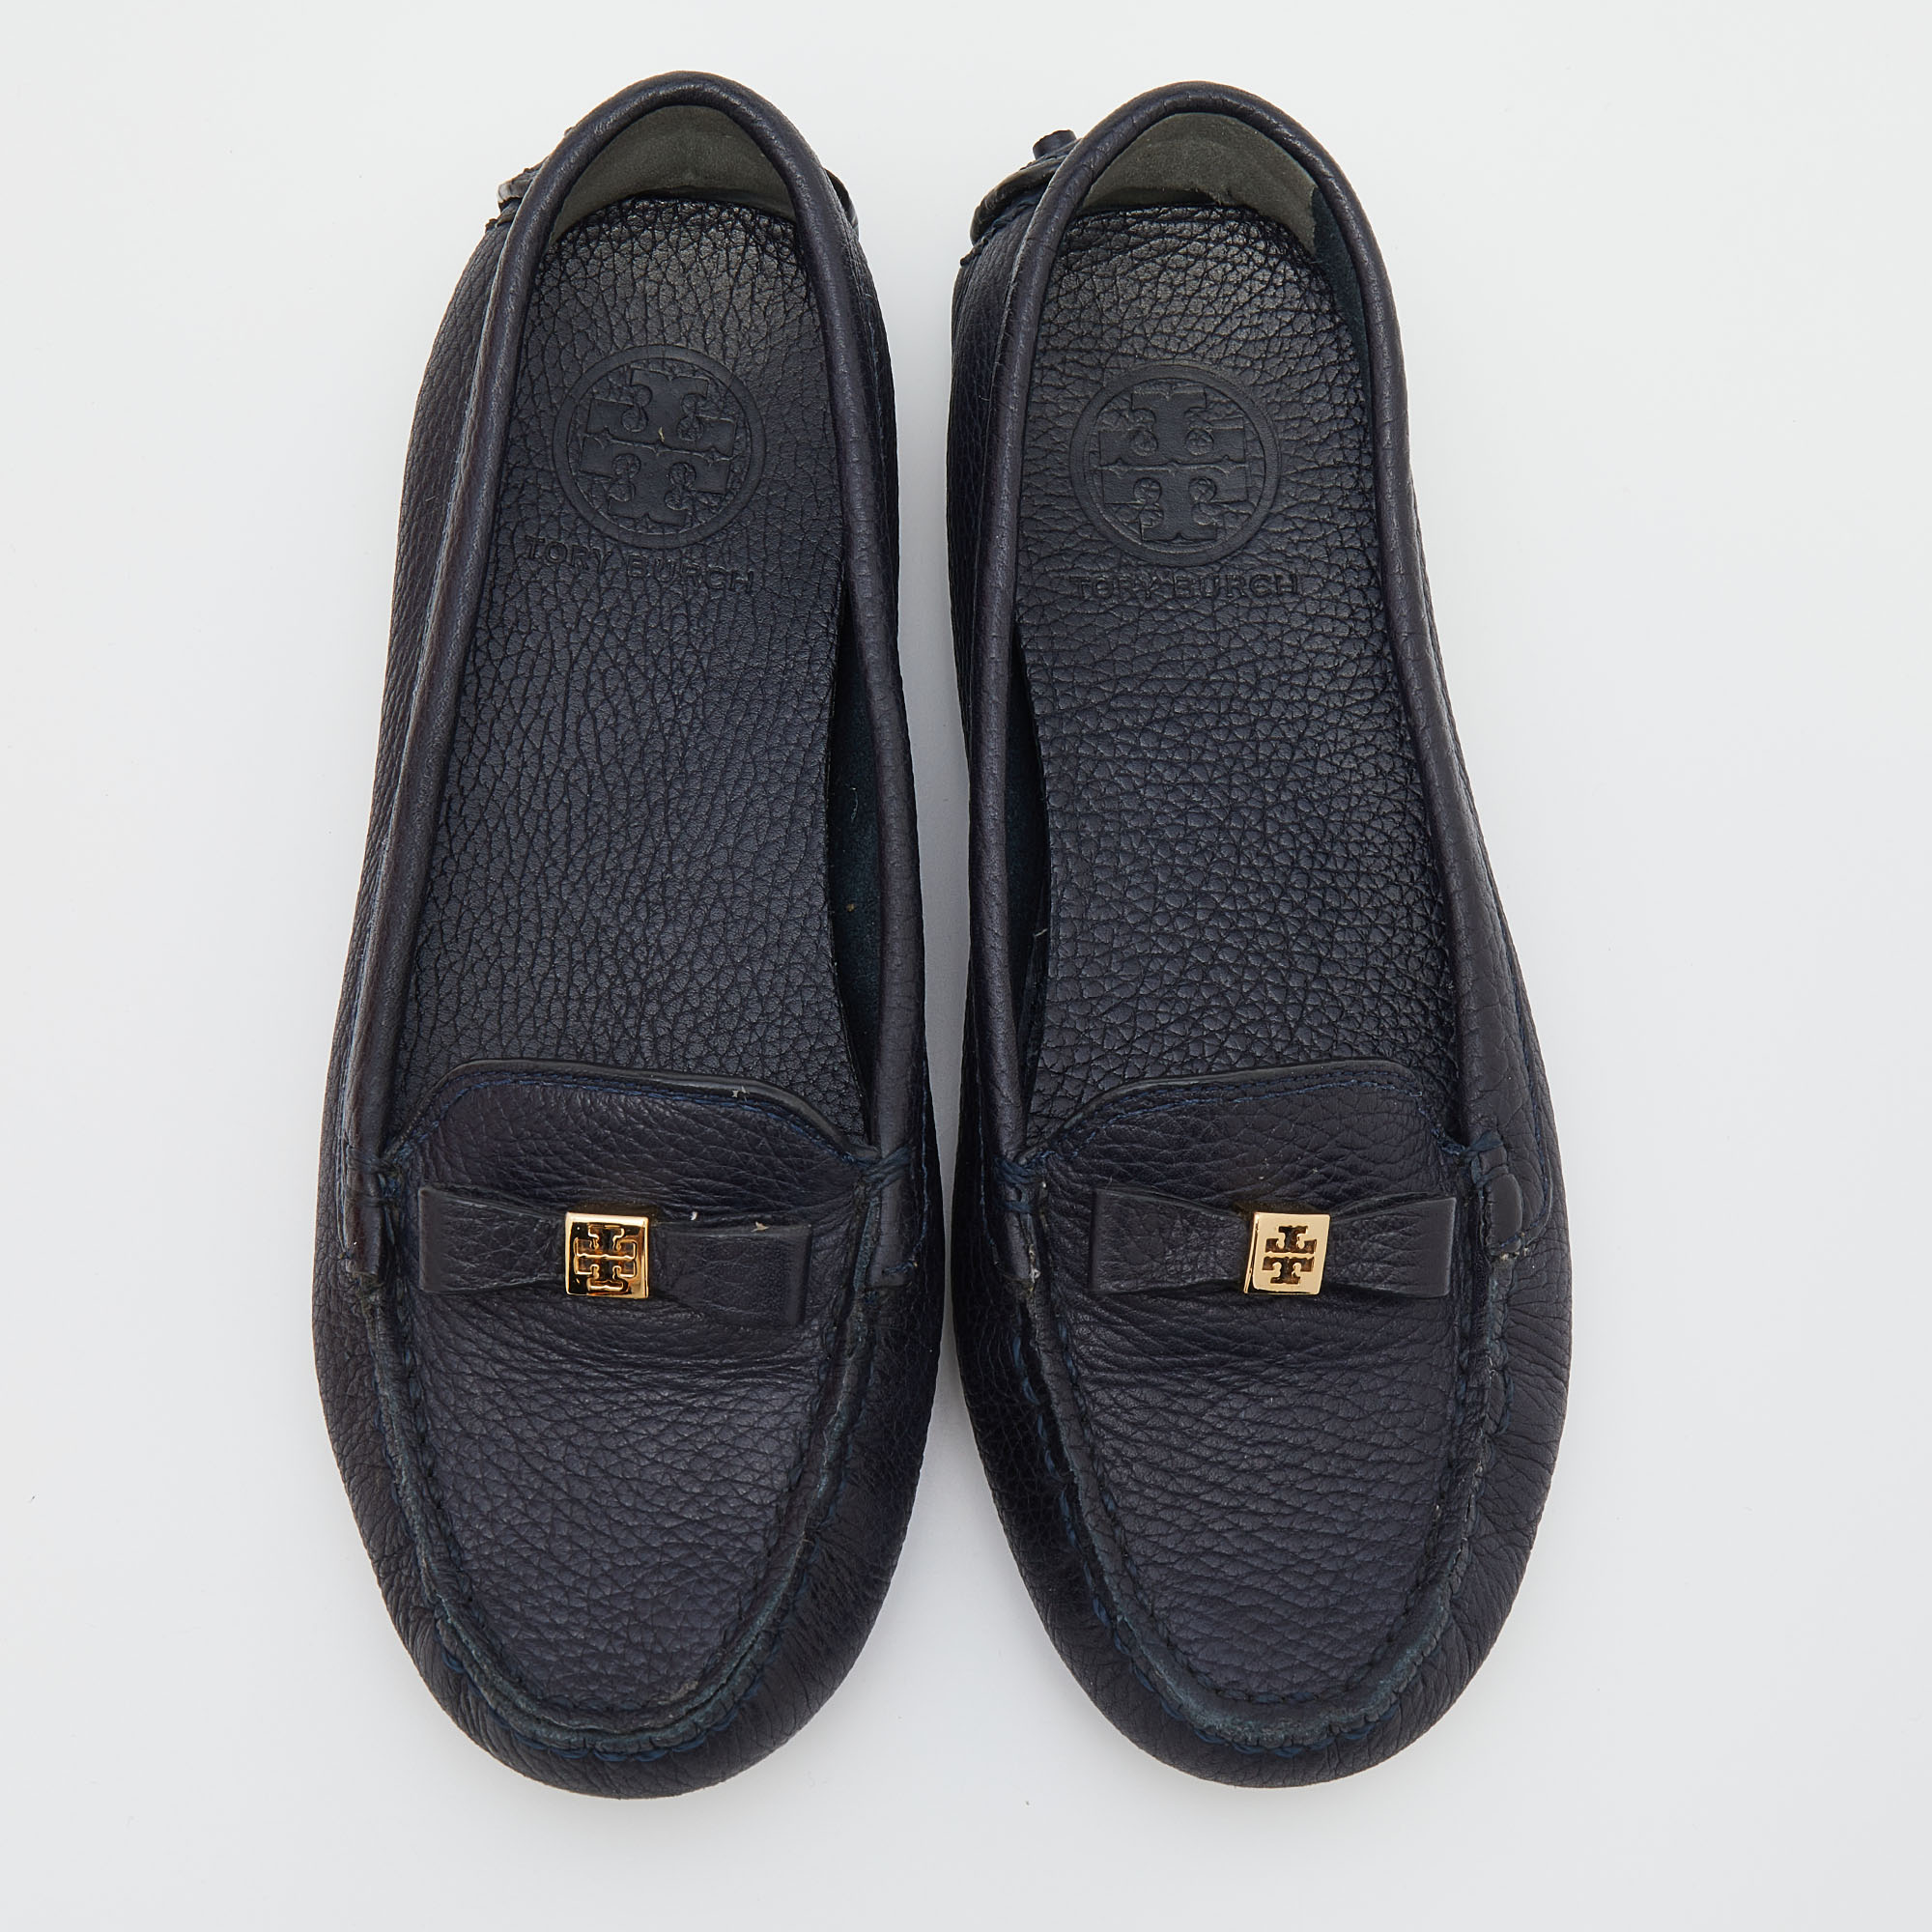 Tory Burch Black Leather Bow Loafers Size 36